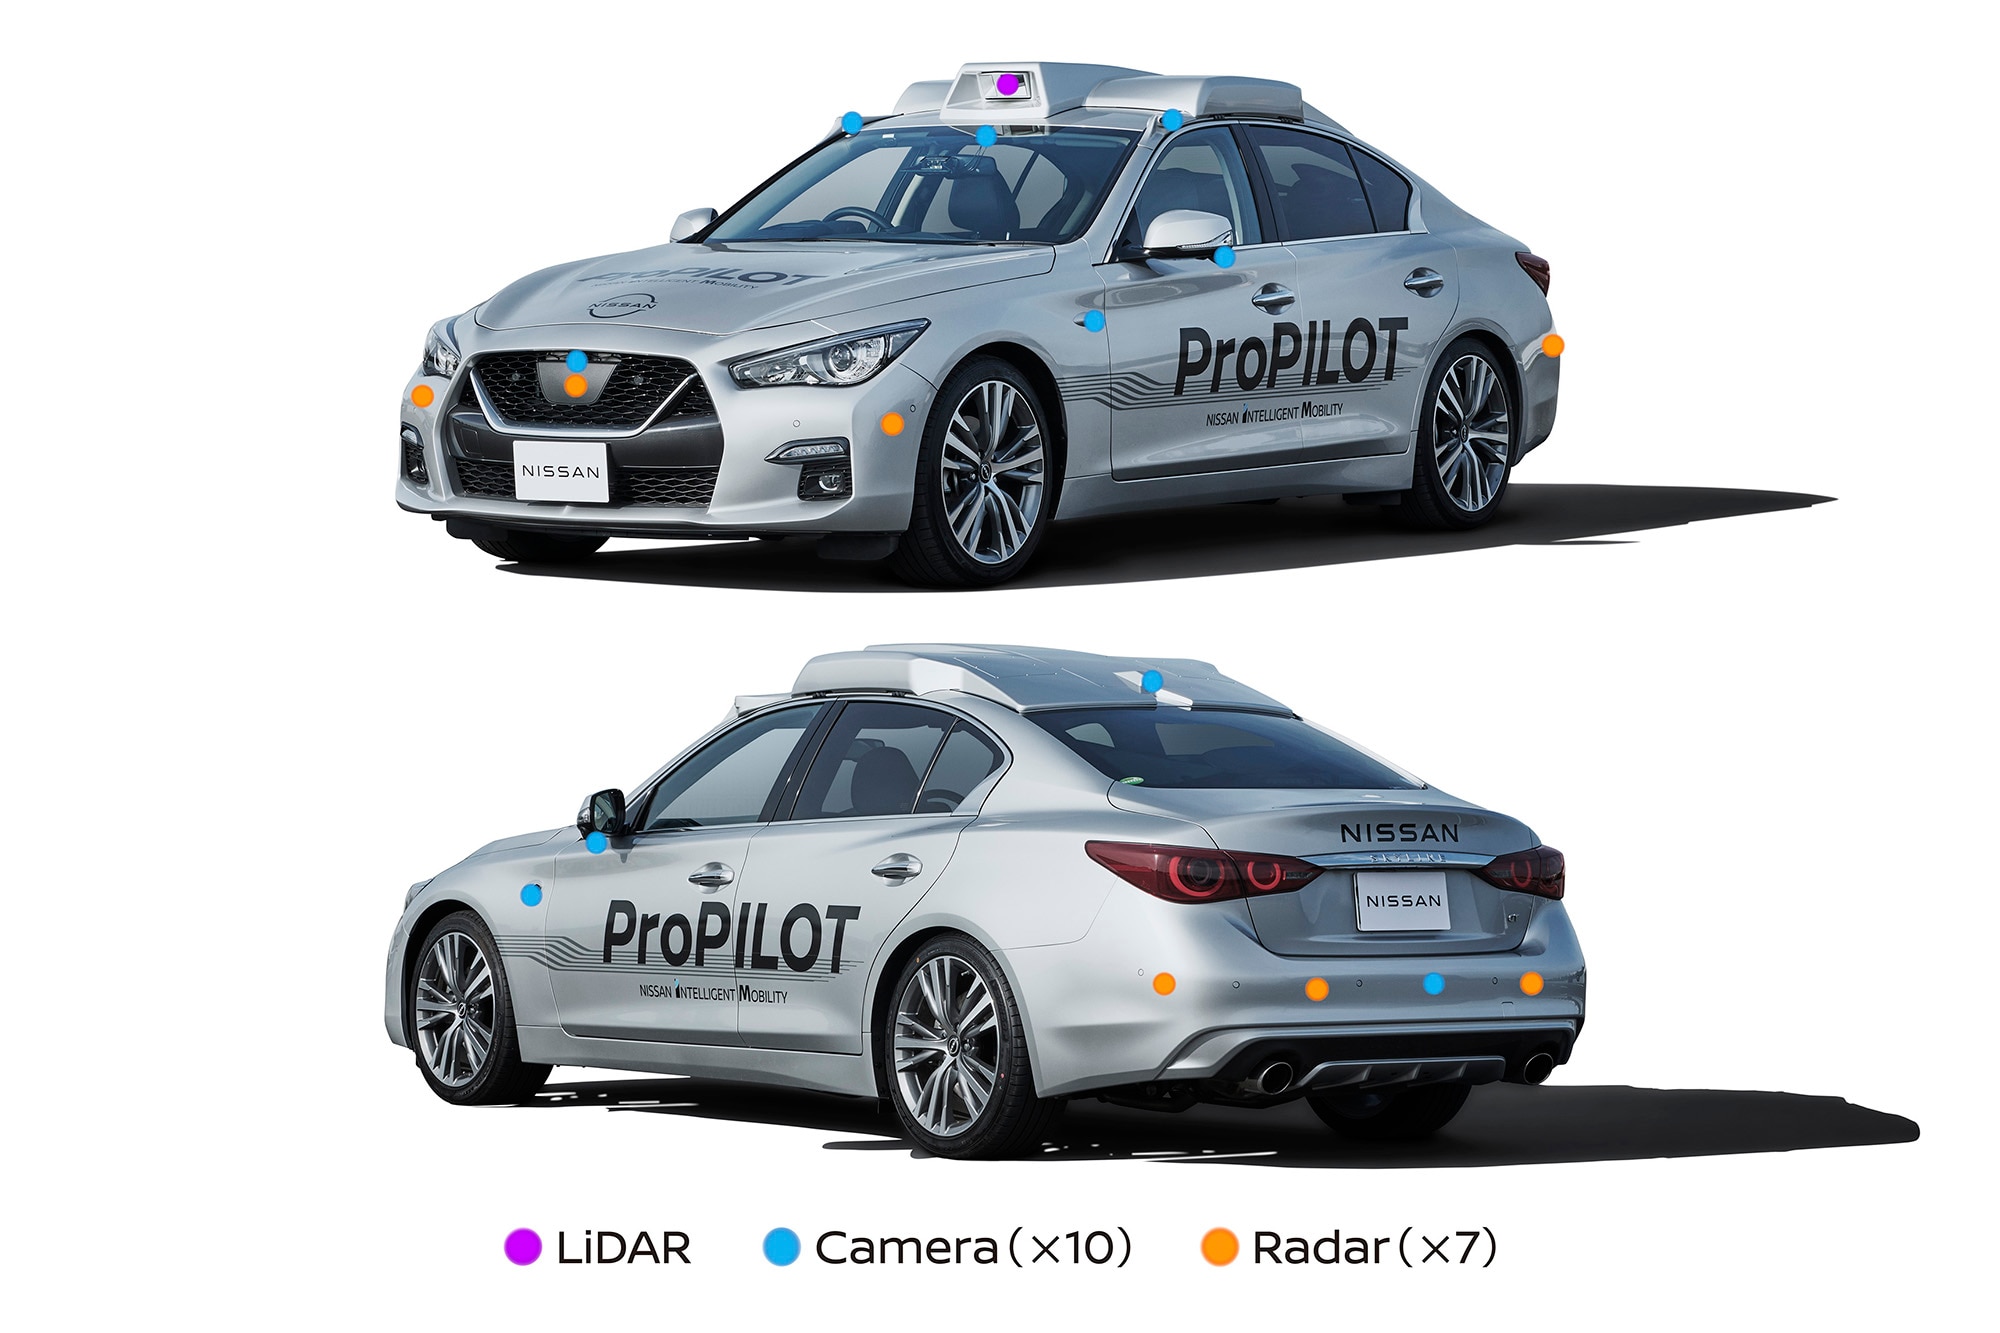 Nissan ProPILOT Concept Zero test vehicle with markings indicating different types of sensors and their placement.